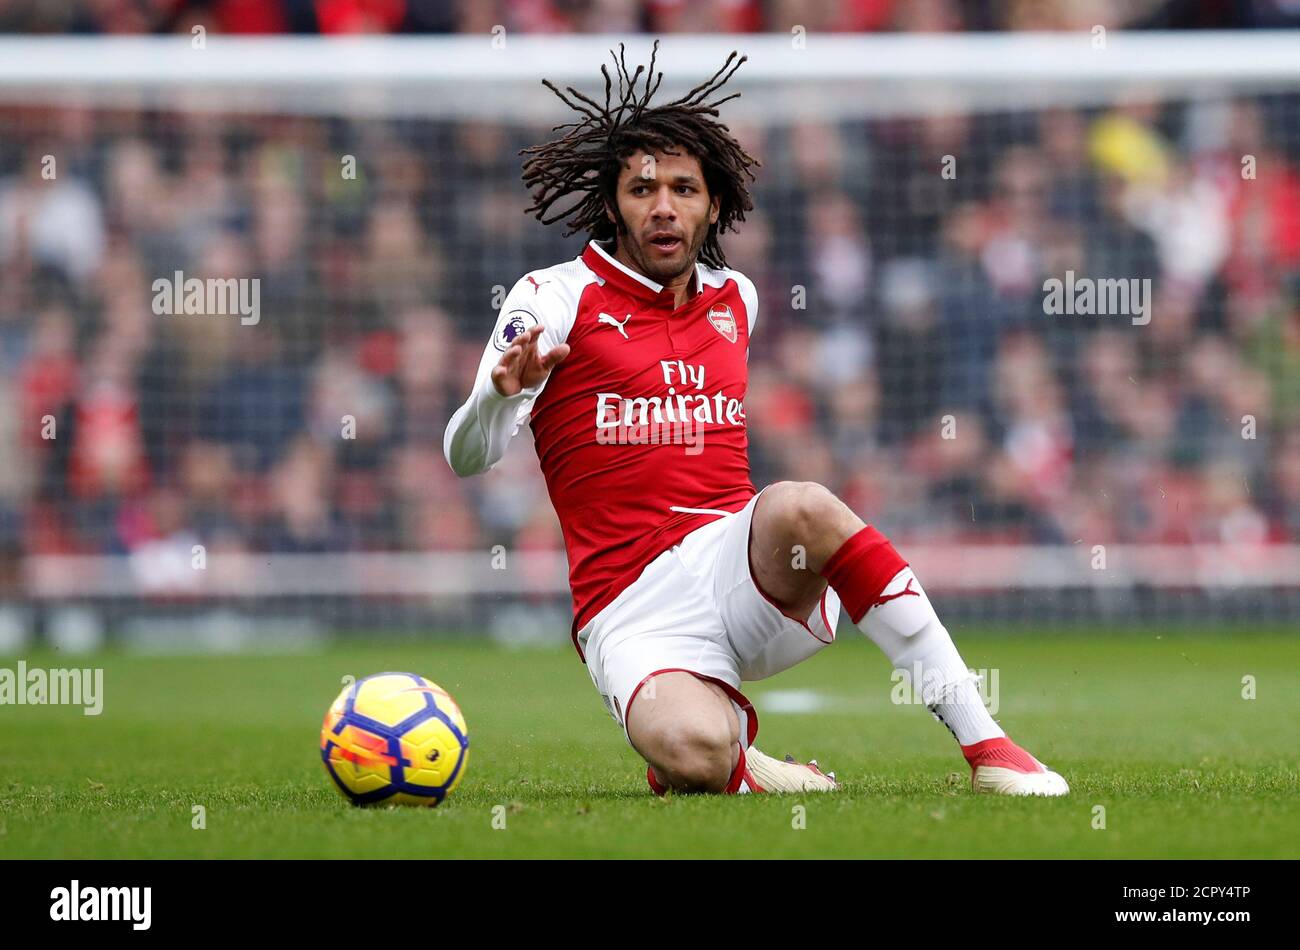 Soccer Football - Premier League - Arsenal vs Watford - Emirates Stadium, London, Britain - March 11, 2018   Arsenal's Mohamed Elneny      REUTERS/Eddie Keogh    EDITORIAL USE ONLY. No use with unauthorized audio, video, data, fixture lists, club/league logos or 'live' services. Online in-match use limited to 75 images, no video emulation. No use in betting, games or single club/league/player publications.  Please contact your account representative for further details. Stock Photo